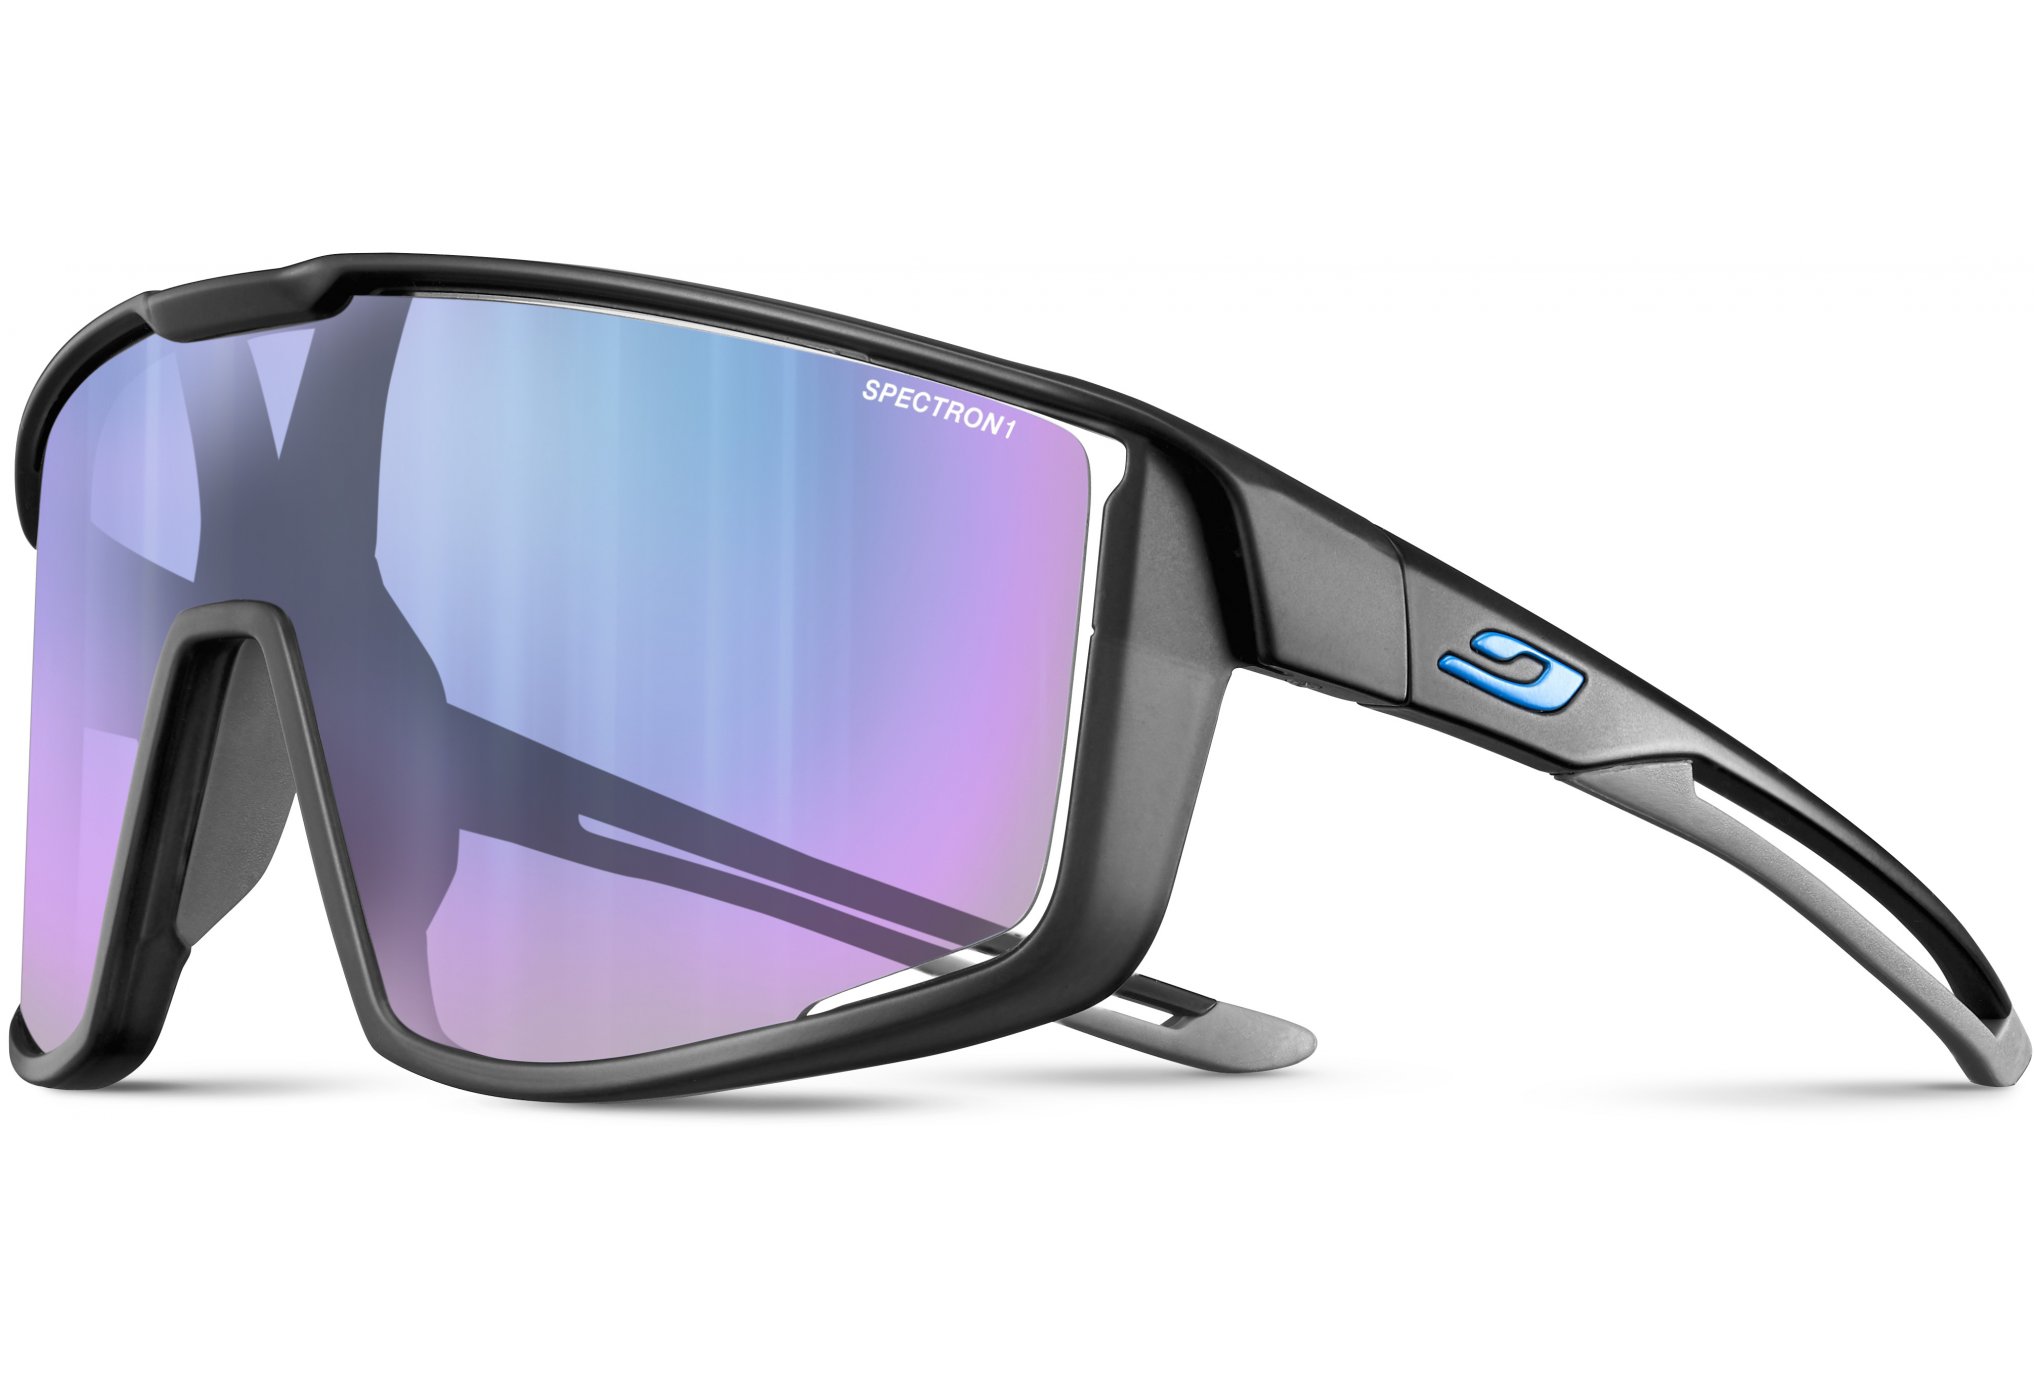 Lunettes solaires Julbo Fury : un accessoire outdoor - Outdoor And News